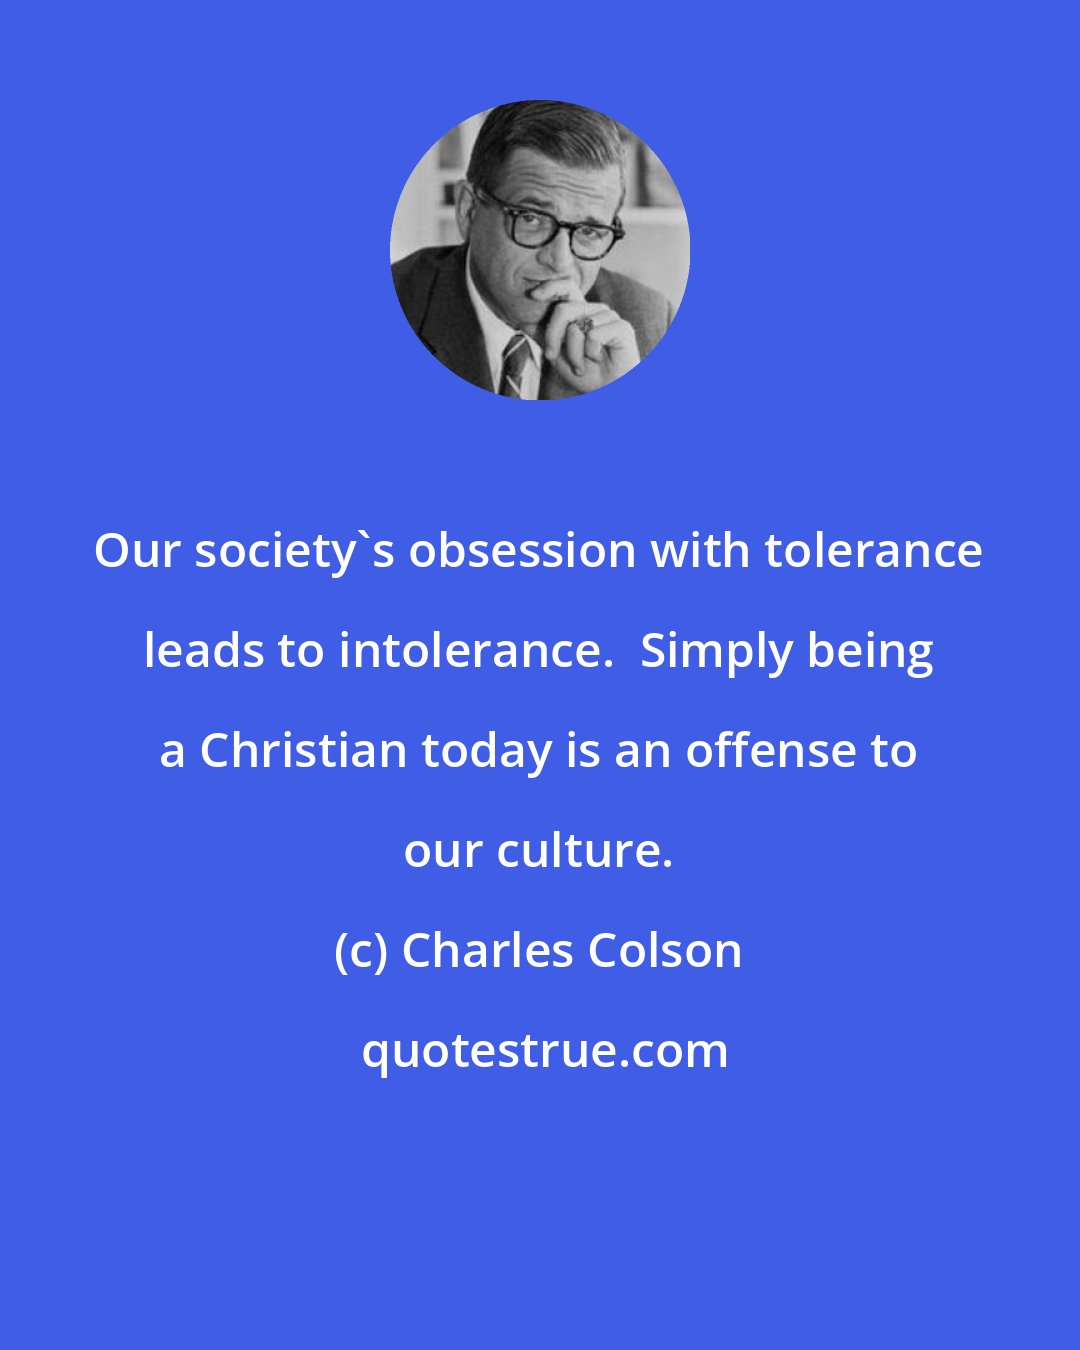 Charles Colson: Our society's obsession with tolerance leads to intolerance.  Simply being a Christian today is an offense to our culture.